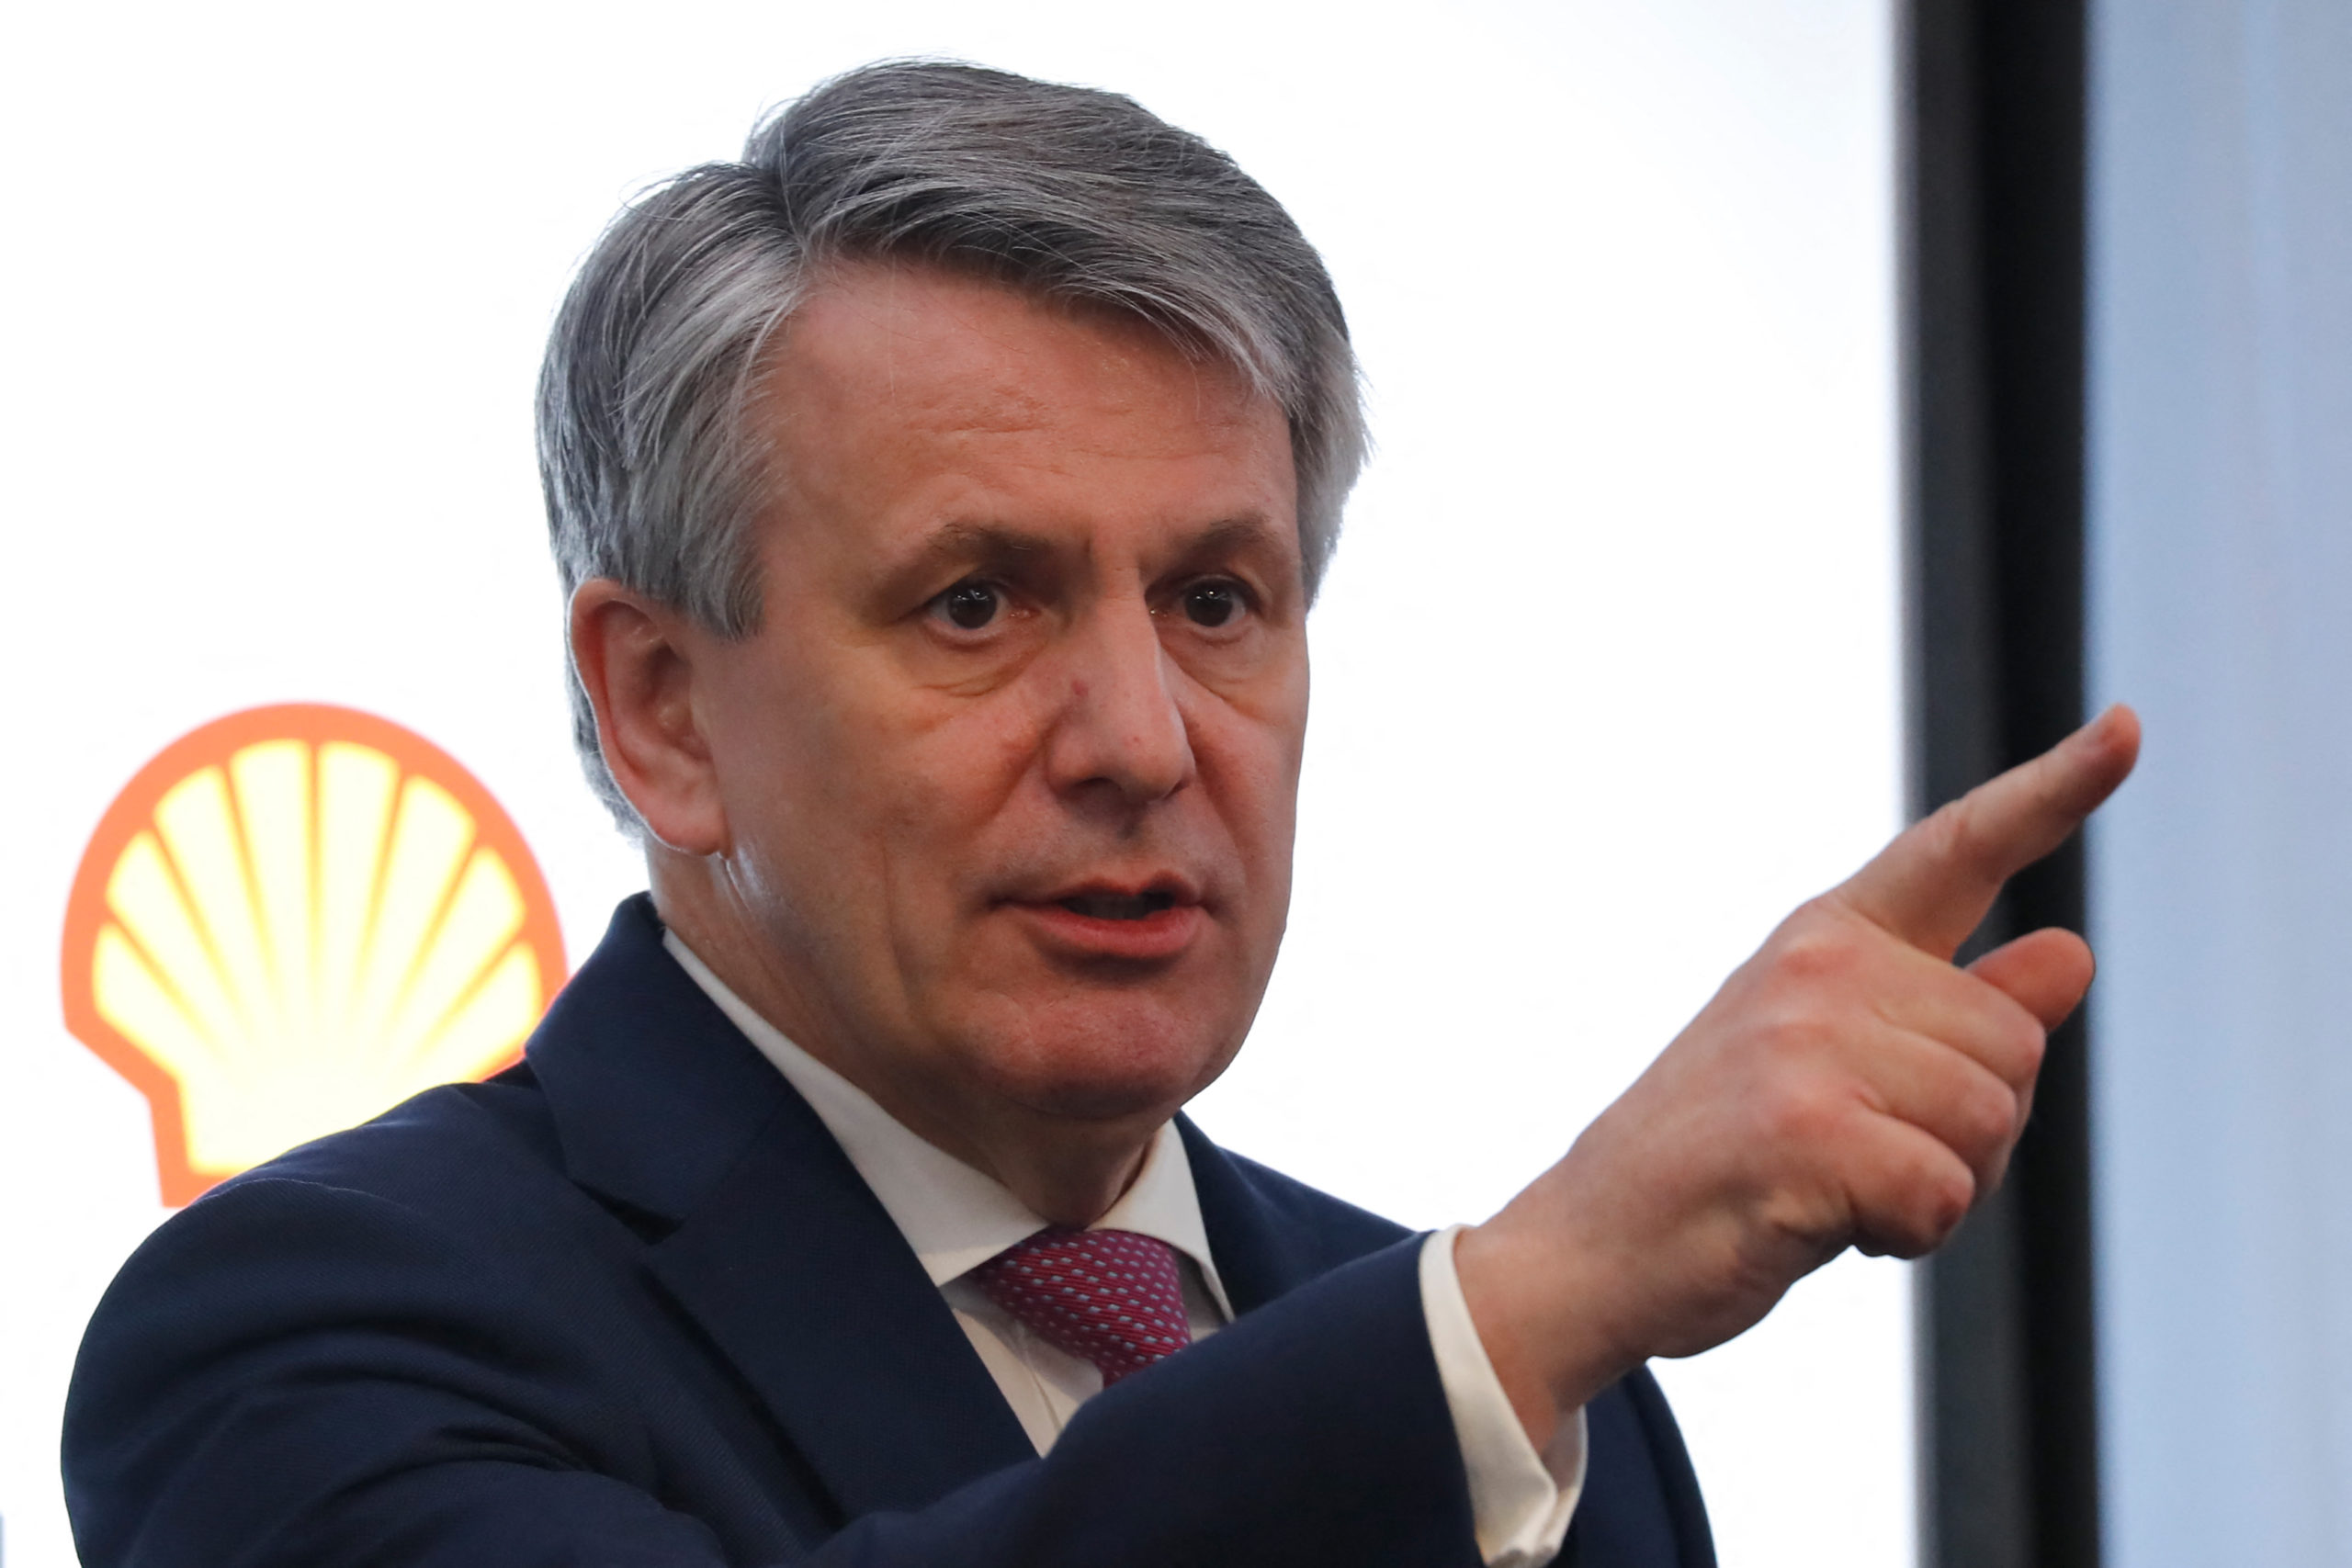 Shell boss to accelerate ‘greening’ after judgement